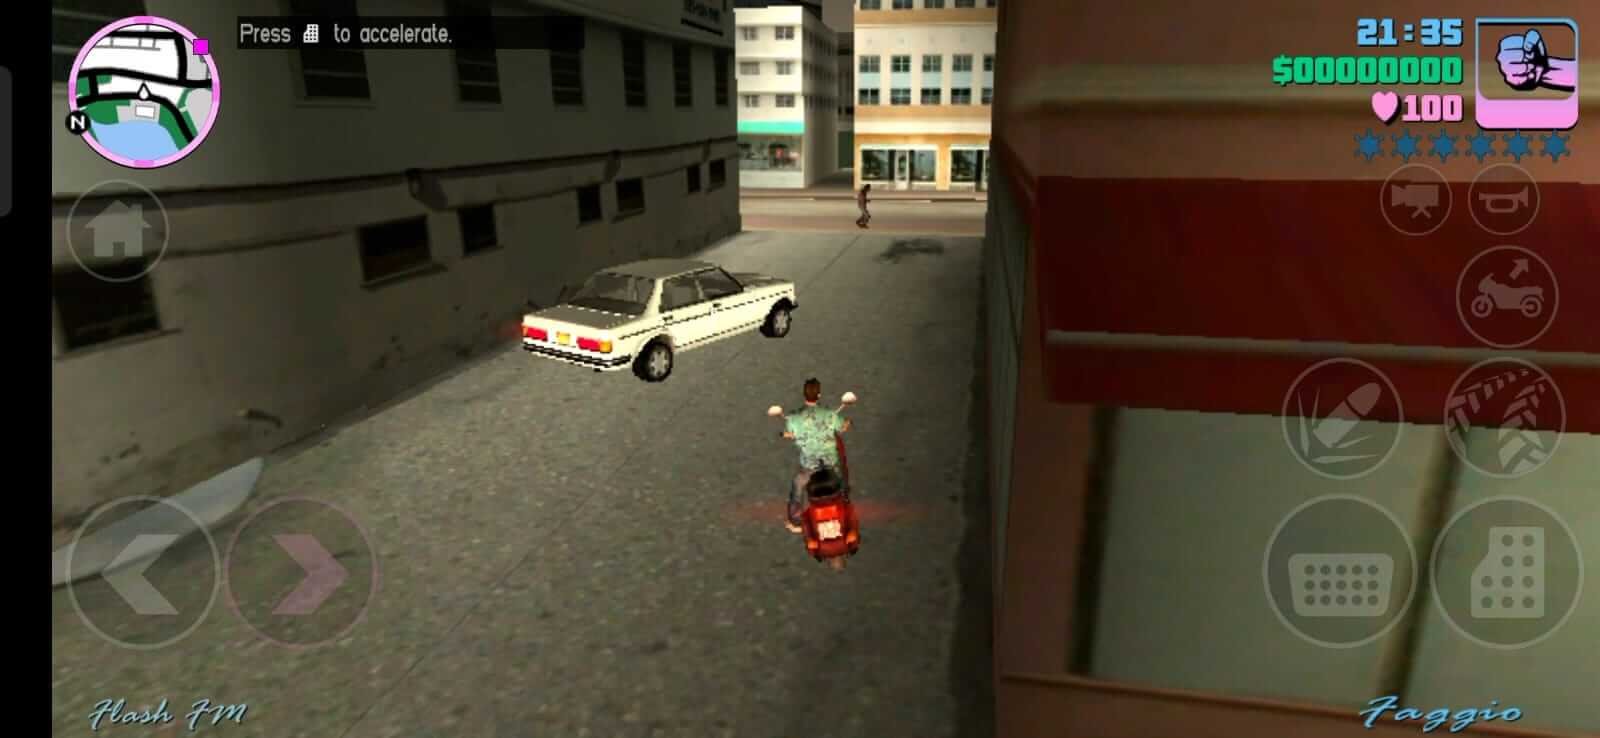 Download GTA Vice City APK +OBB Latest Version 1.12 & 1.10 With